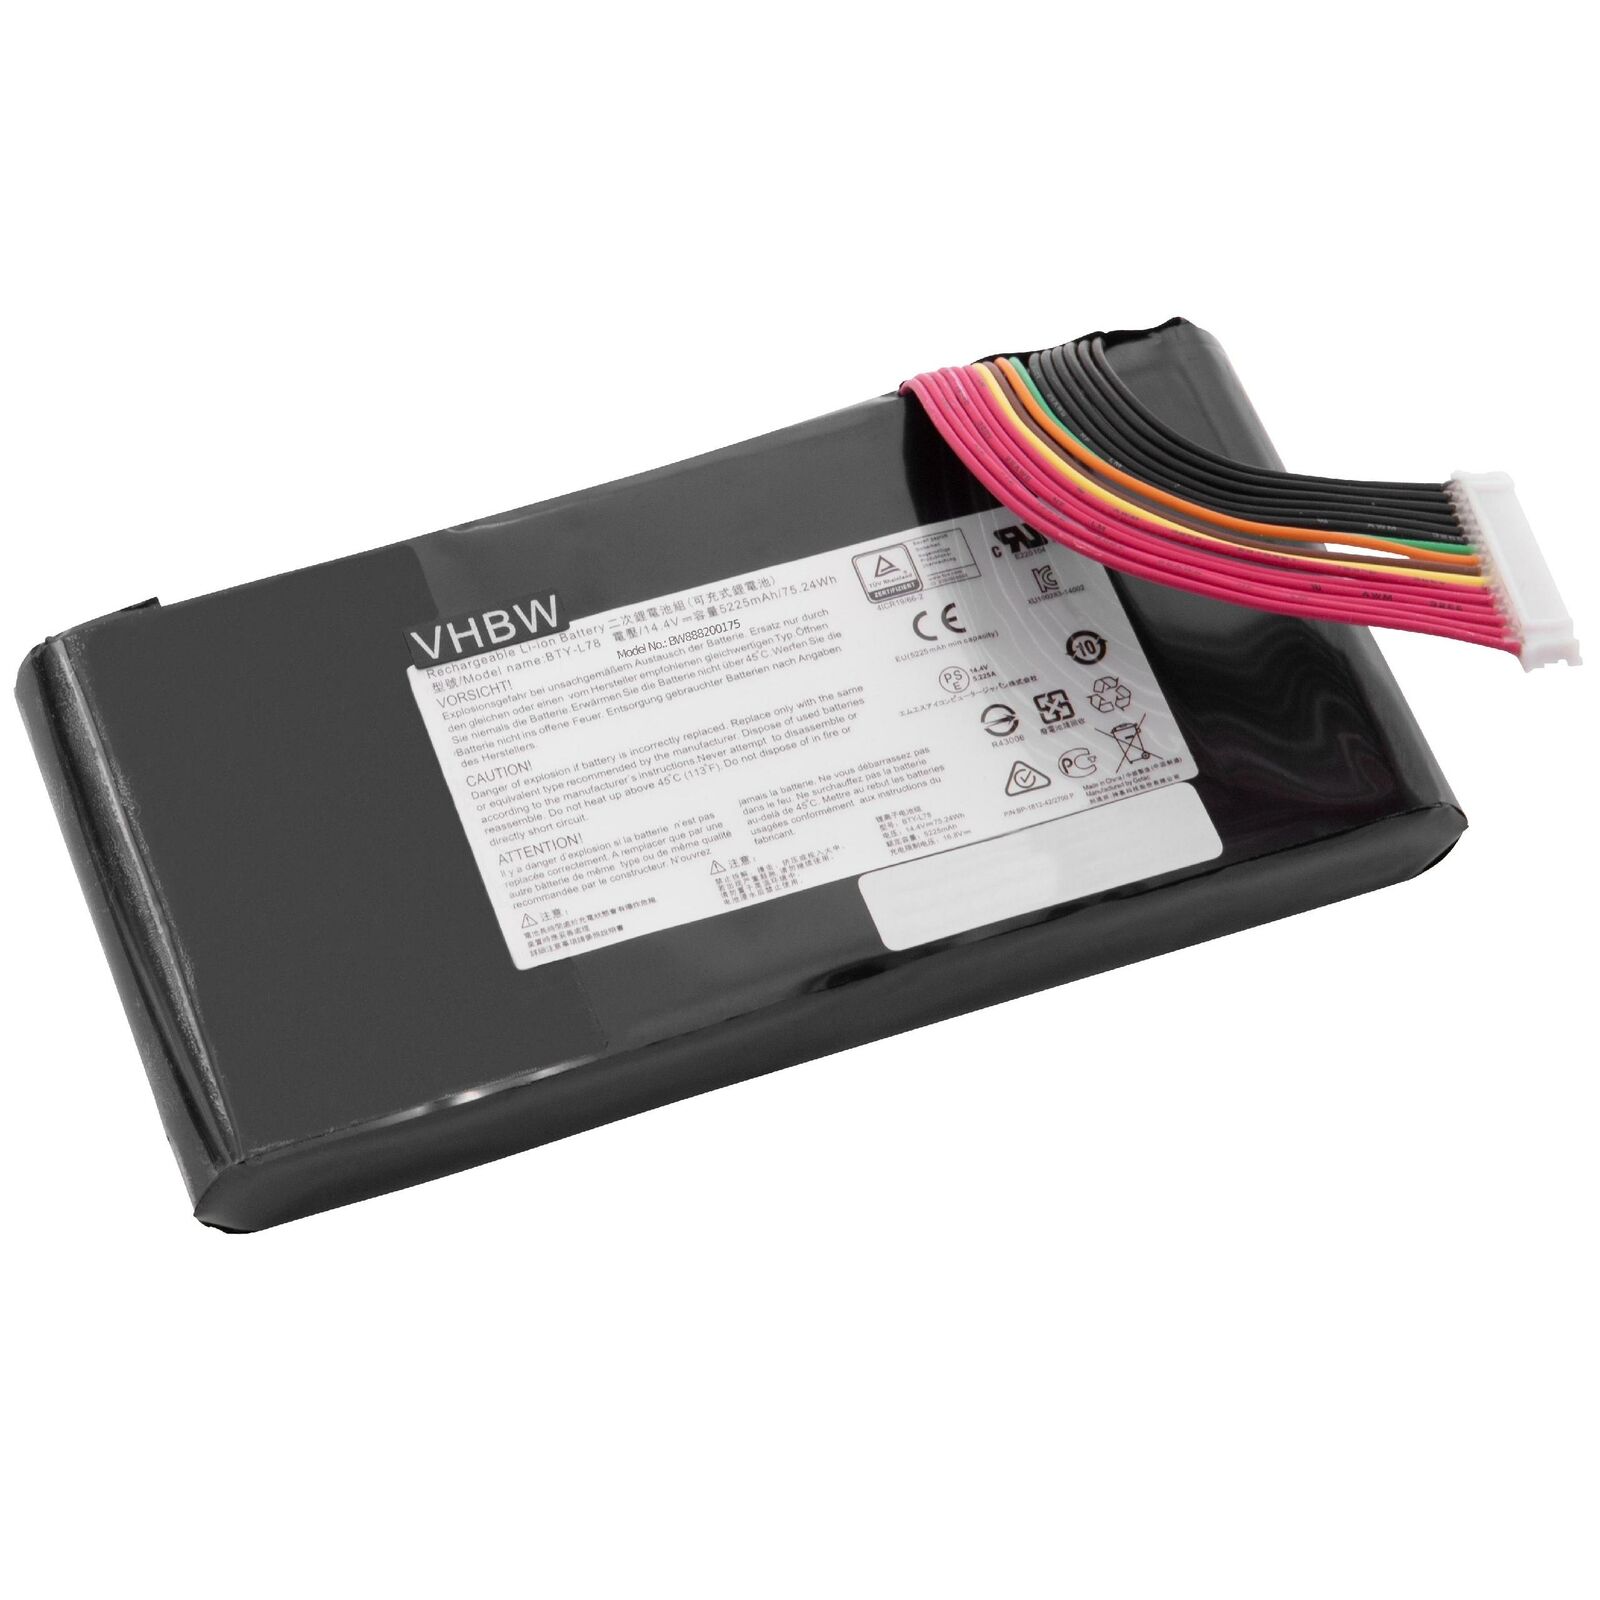 BTY-L78 MSI GT62 GT62VR GT62VR 6RD GT80 GT73 GT83 GT83VR GT73VR GT80S compatible battery